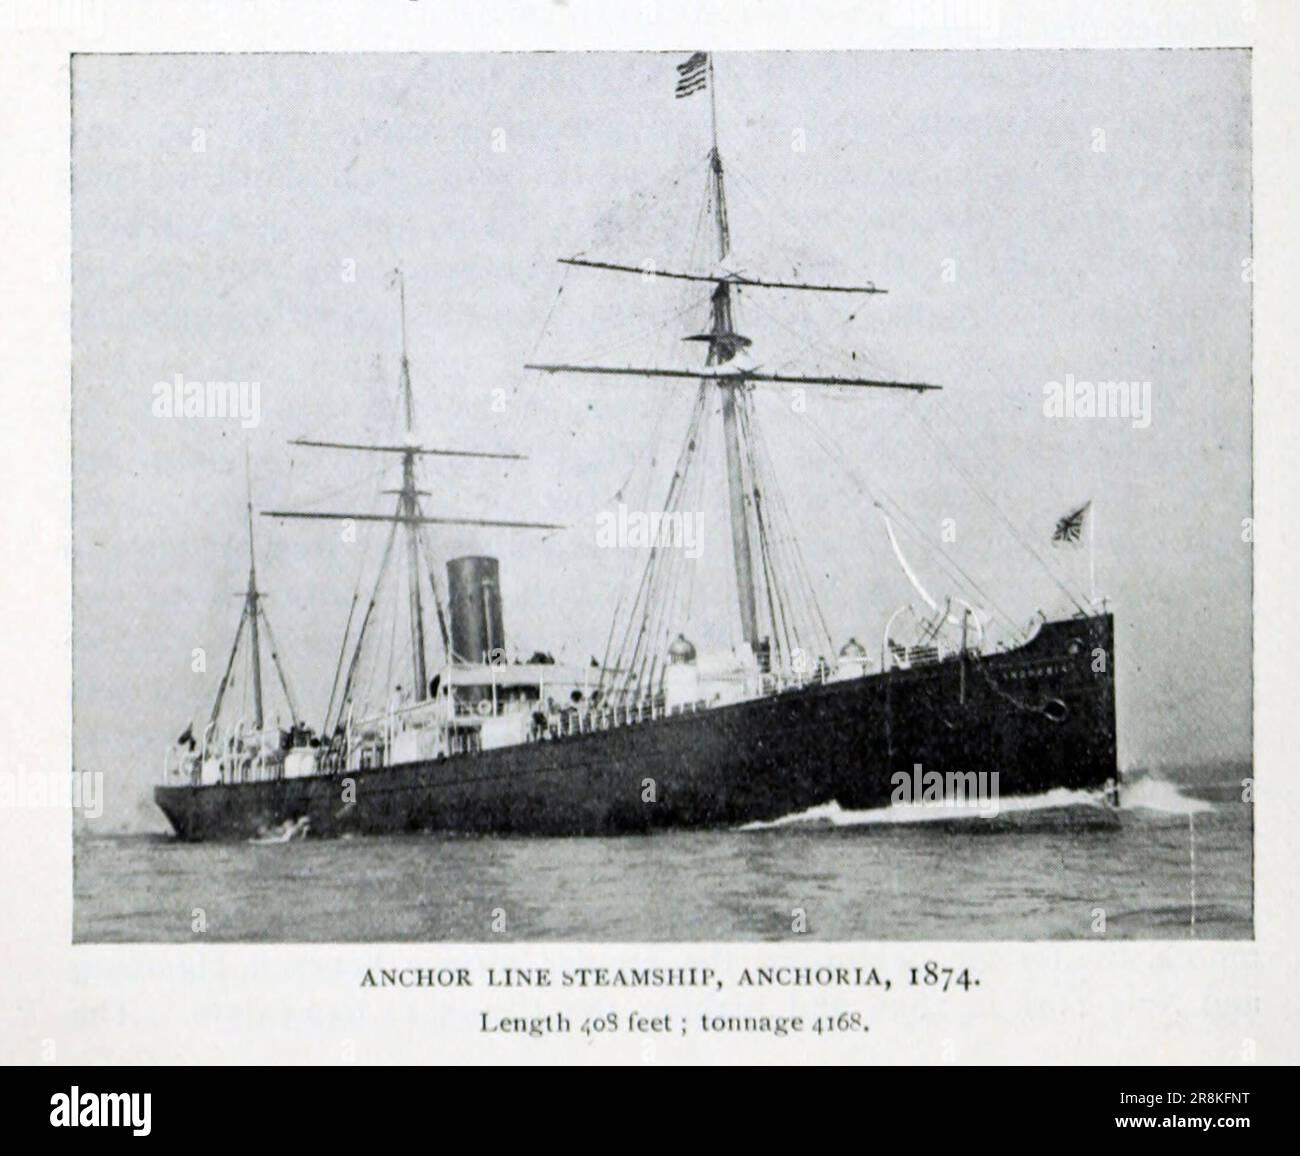 Anchor Line Steamship, Anchoria, 1874 Length 408 feet tonnage 4168 from the Article The Transatlantic Steamers of 1856 to 1880 By Samuel Ward Stanton from The Engineering Magazine DEVOTED TO INDUSTRIAL PROGRESS Volume X October 1896 NEW YORK The Engineering Magazine Co Stock Photo